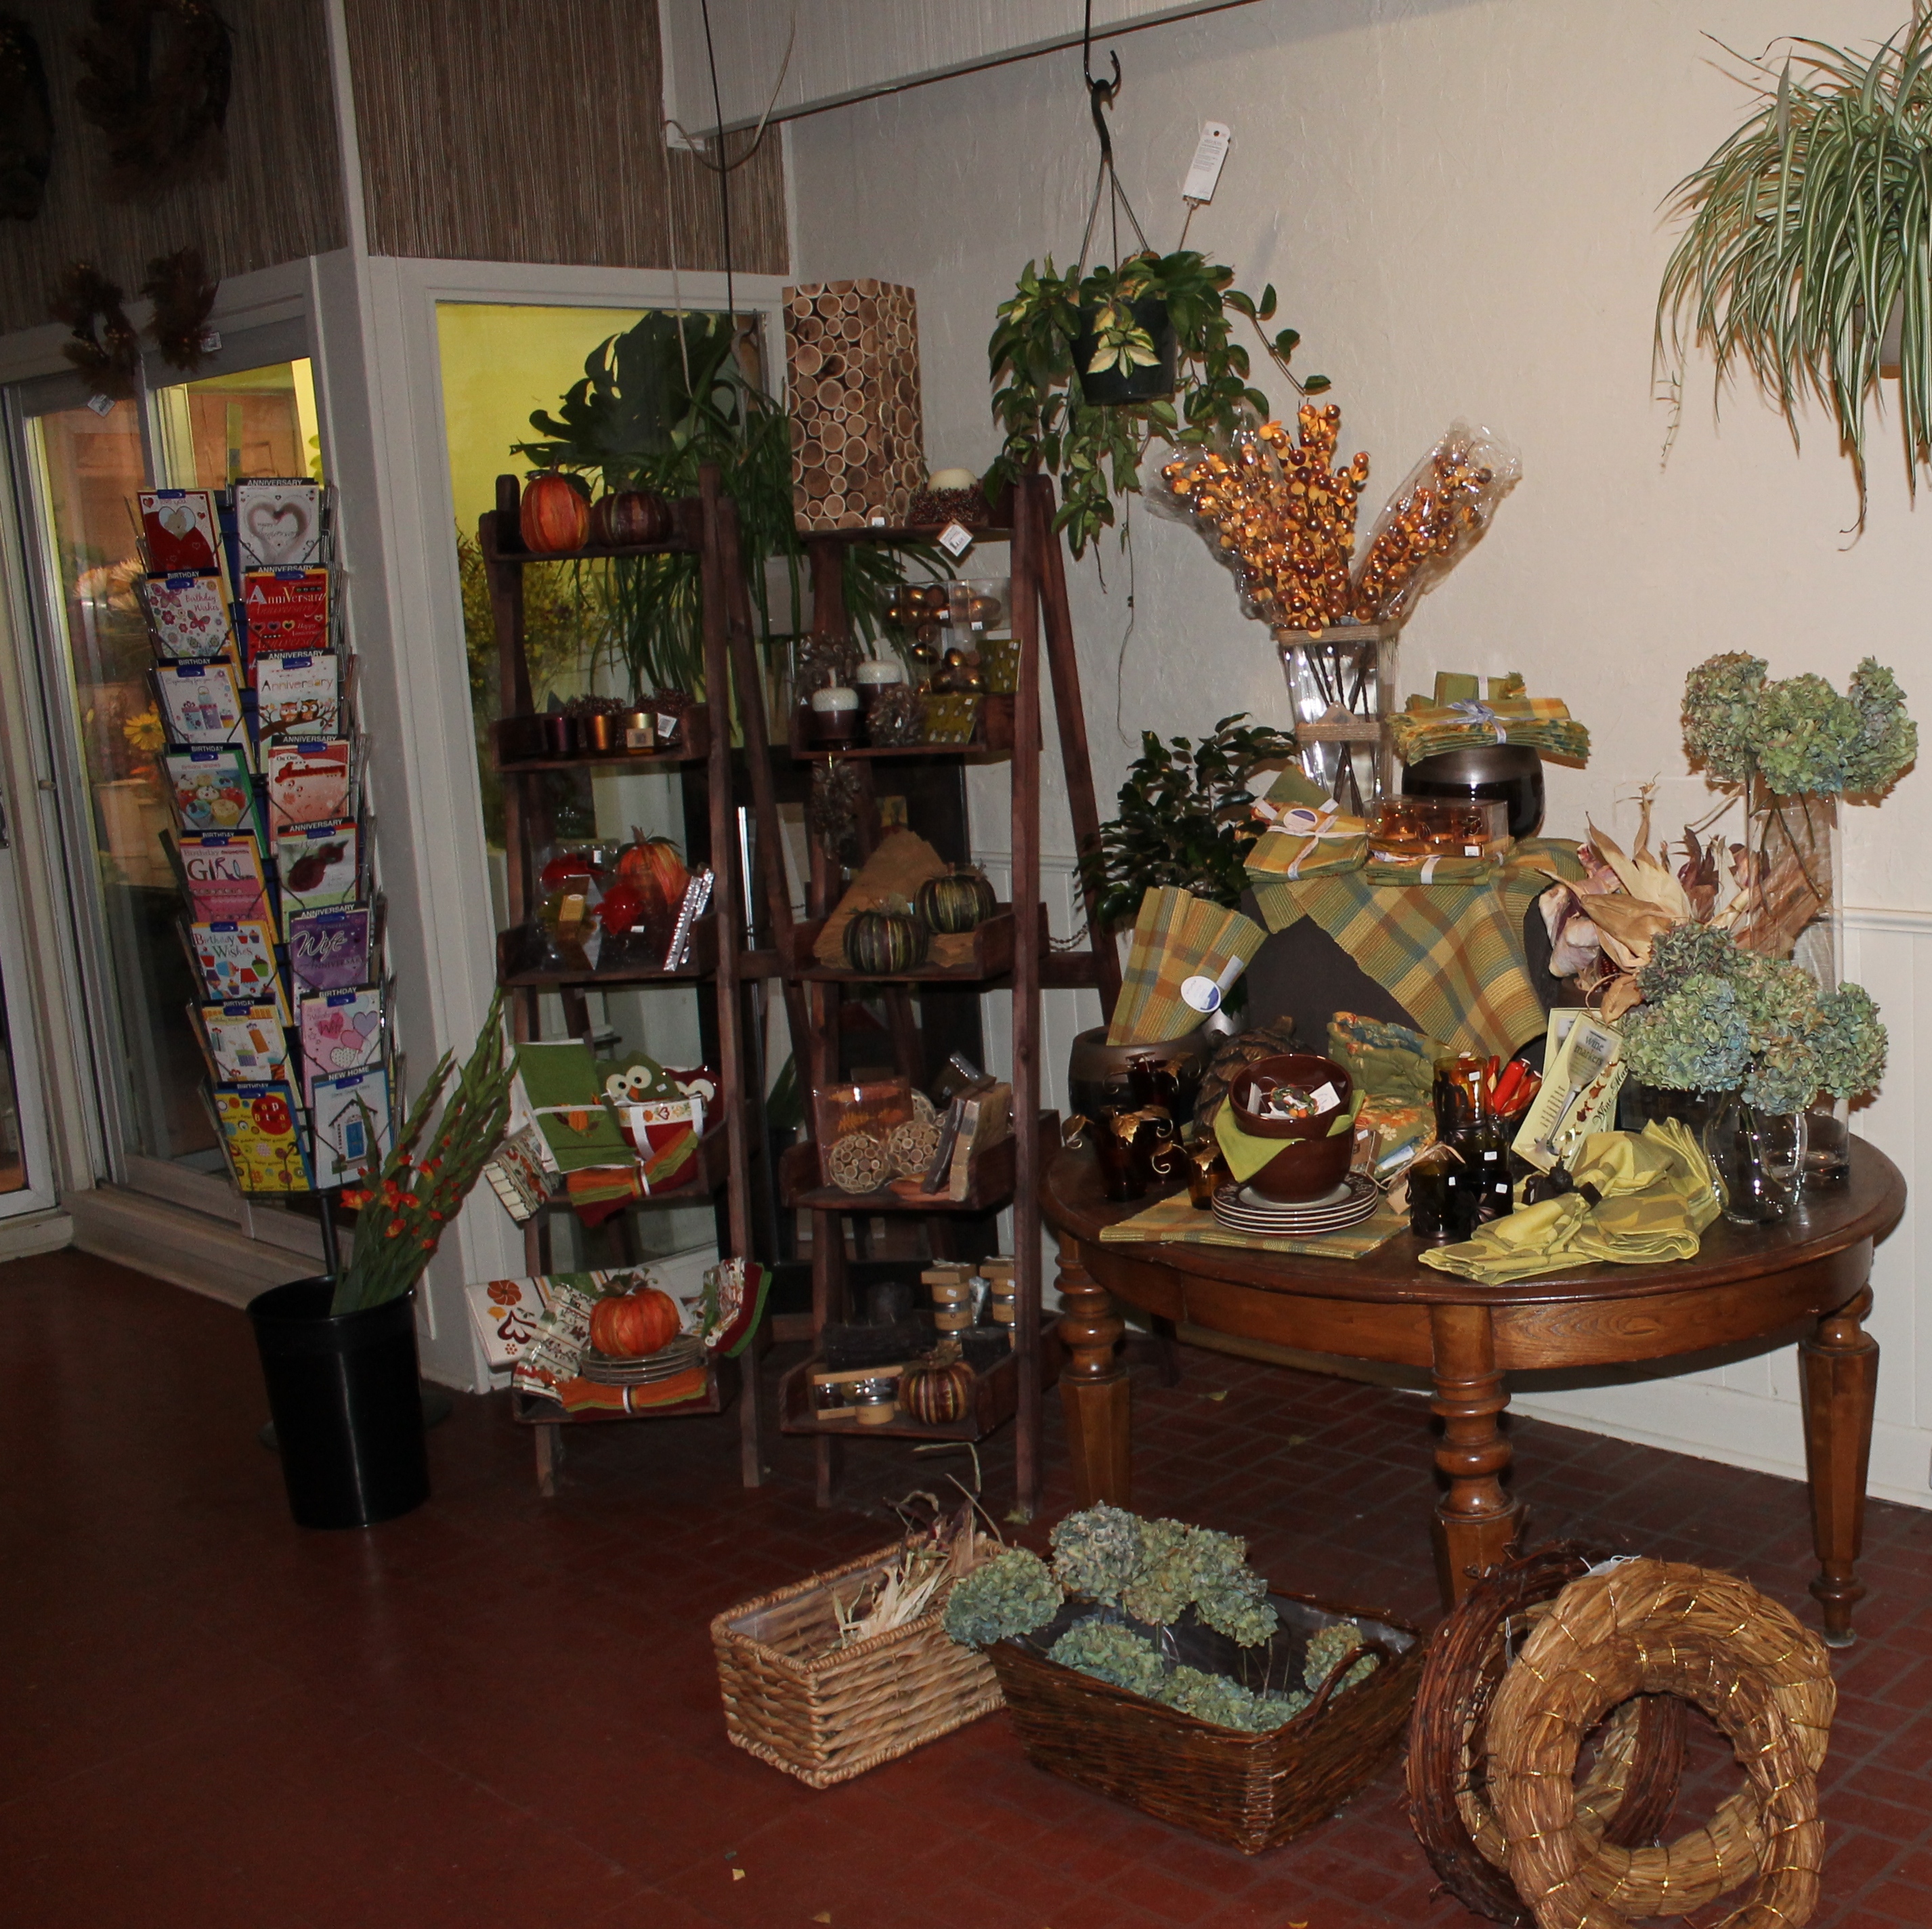 Autumn candles, napkins, bowls and gifts on display